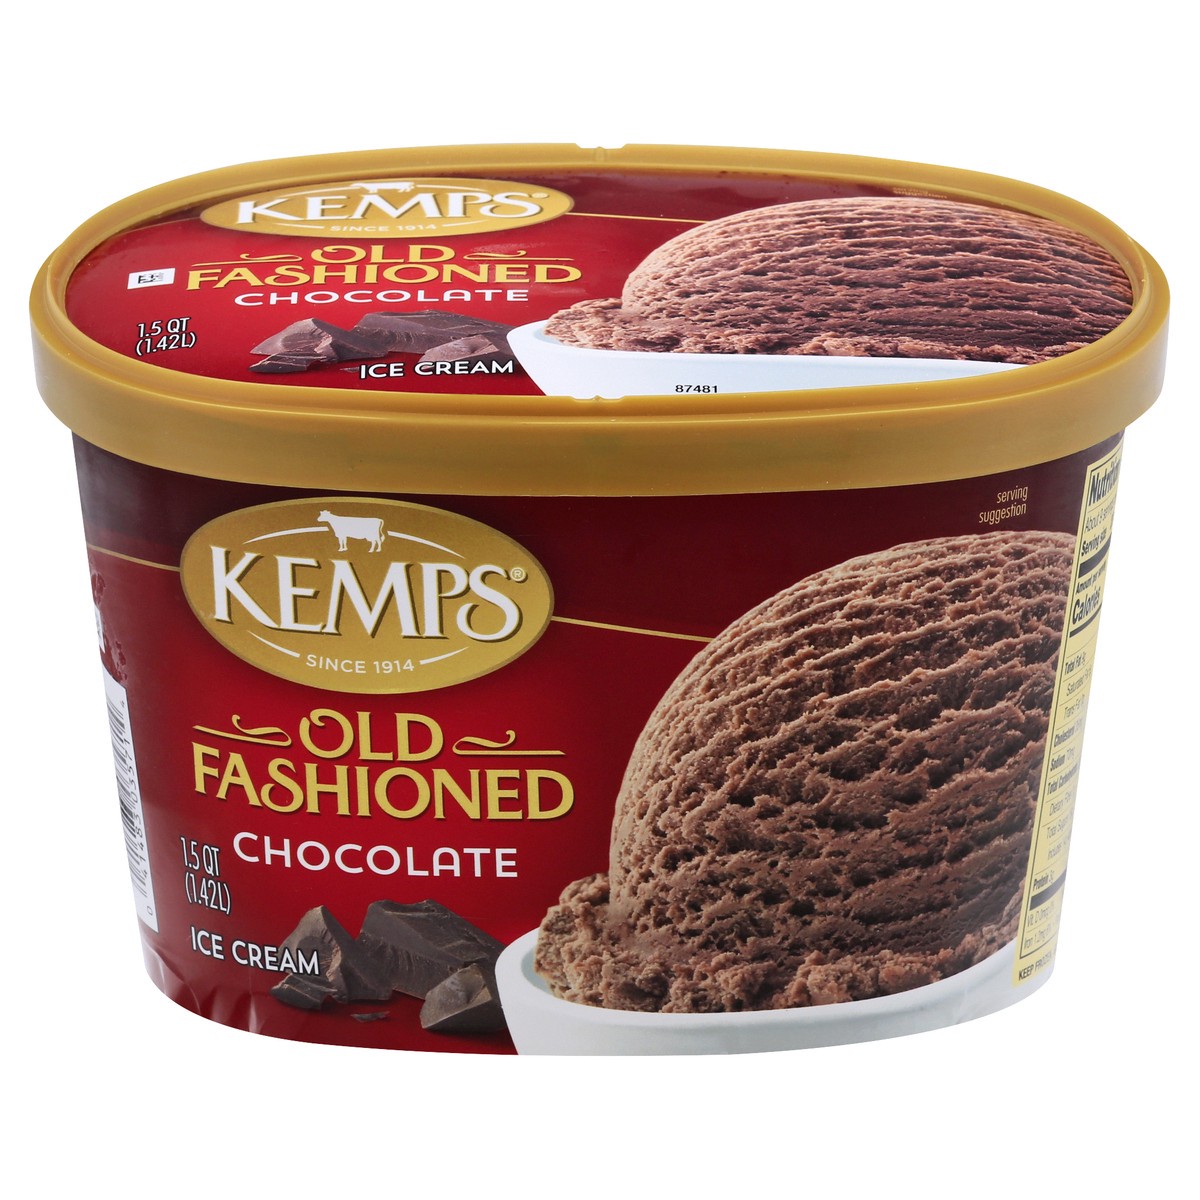 slide 1 of 9, Kemps Old Fashioned Chocolate Icecream, 1.5 qt